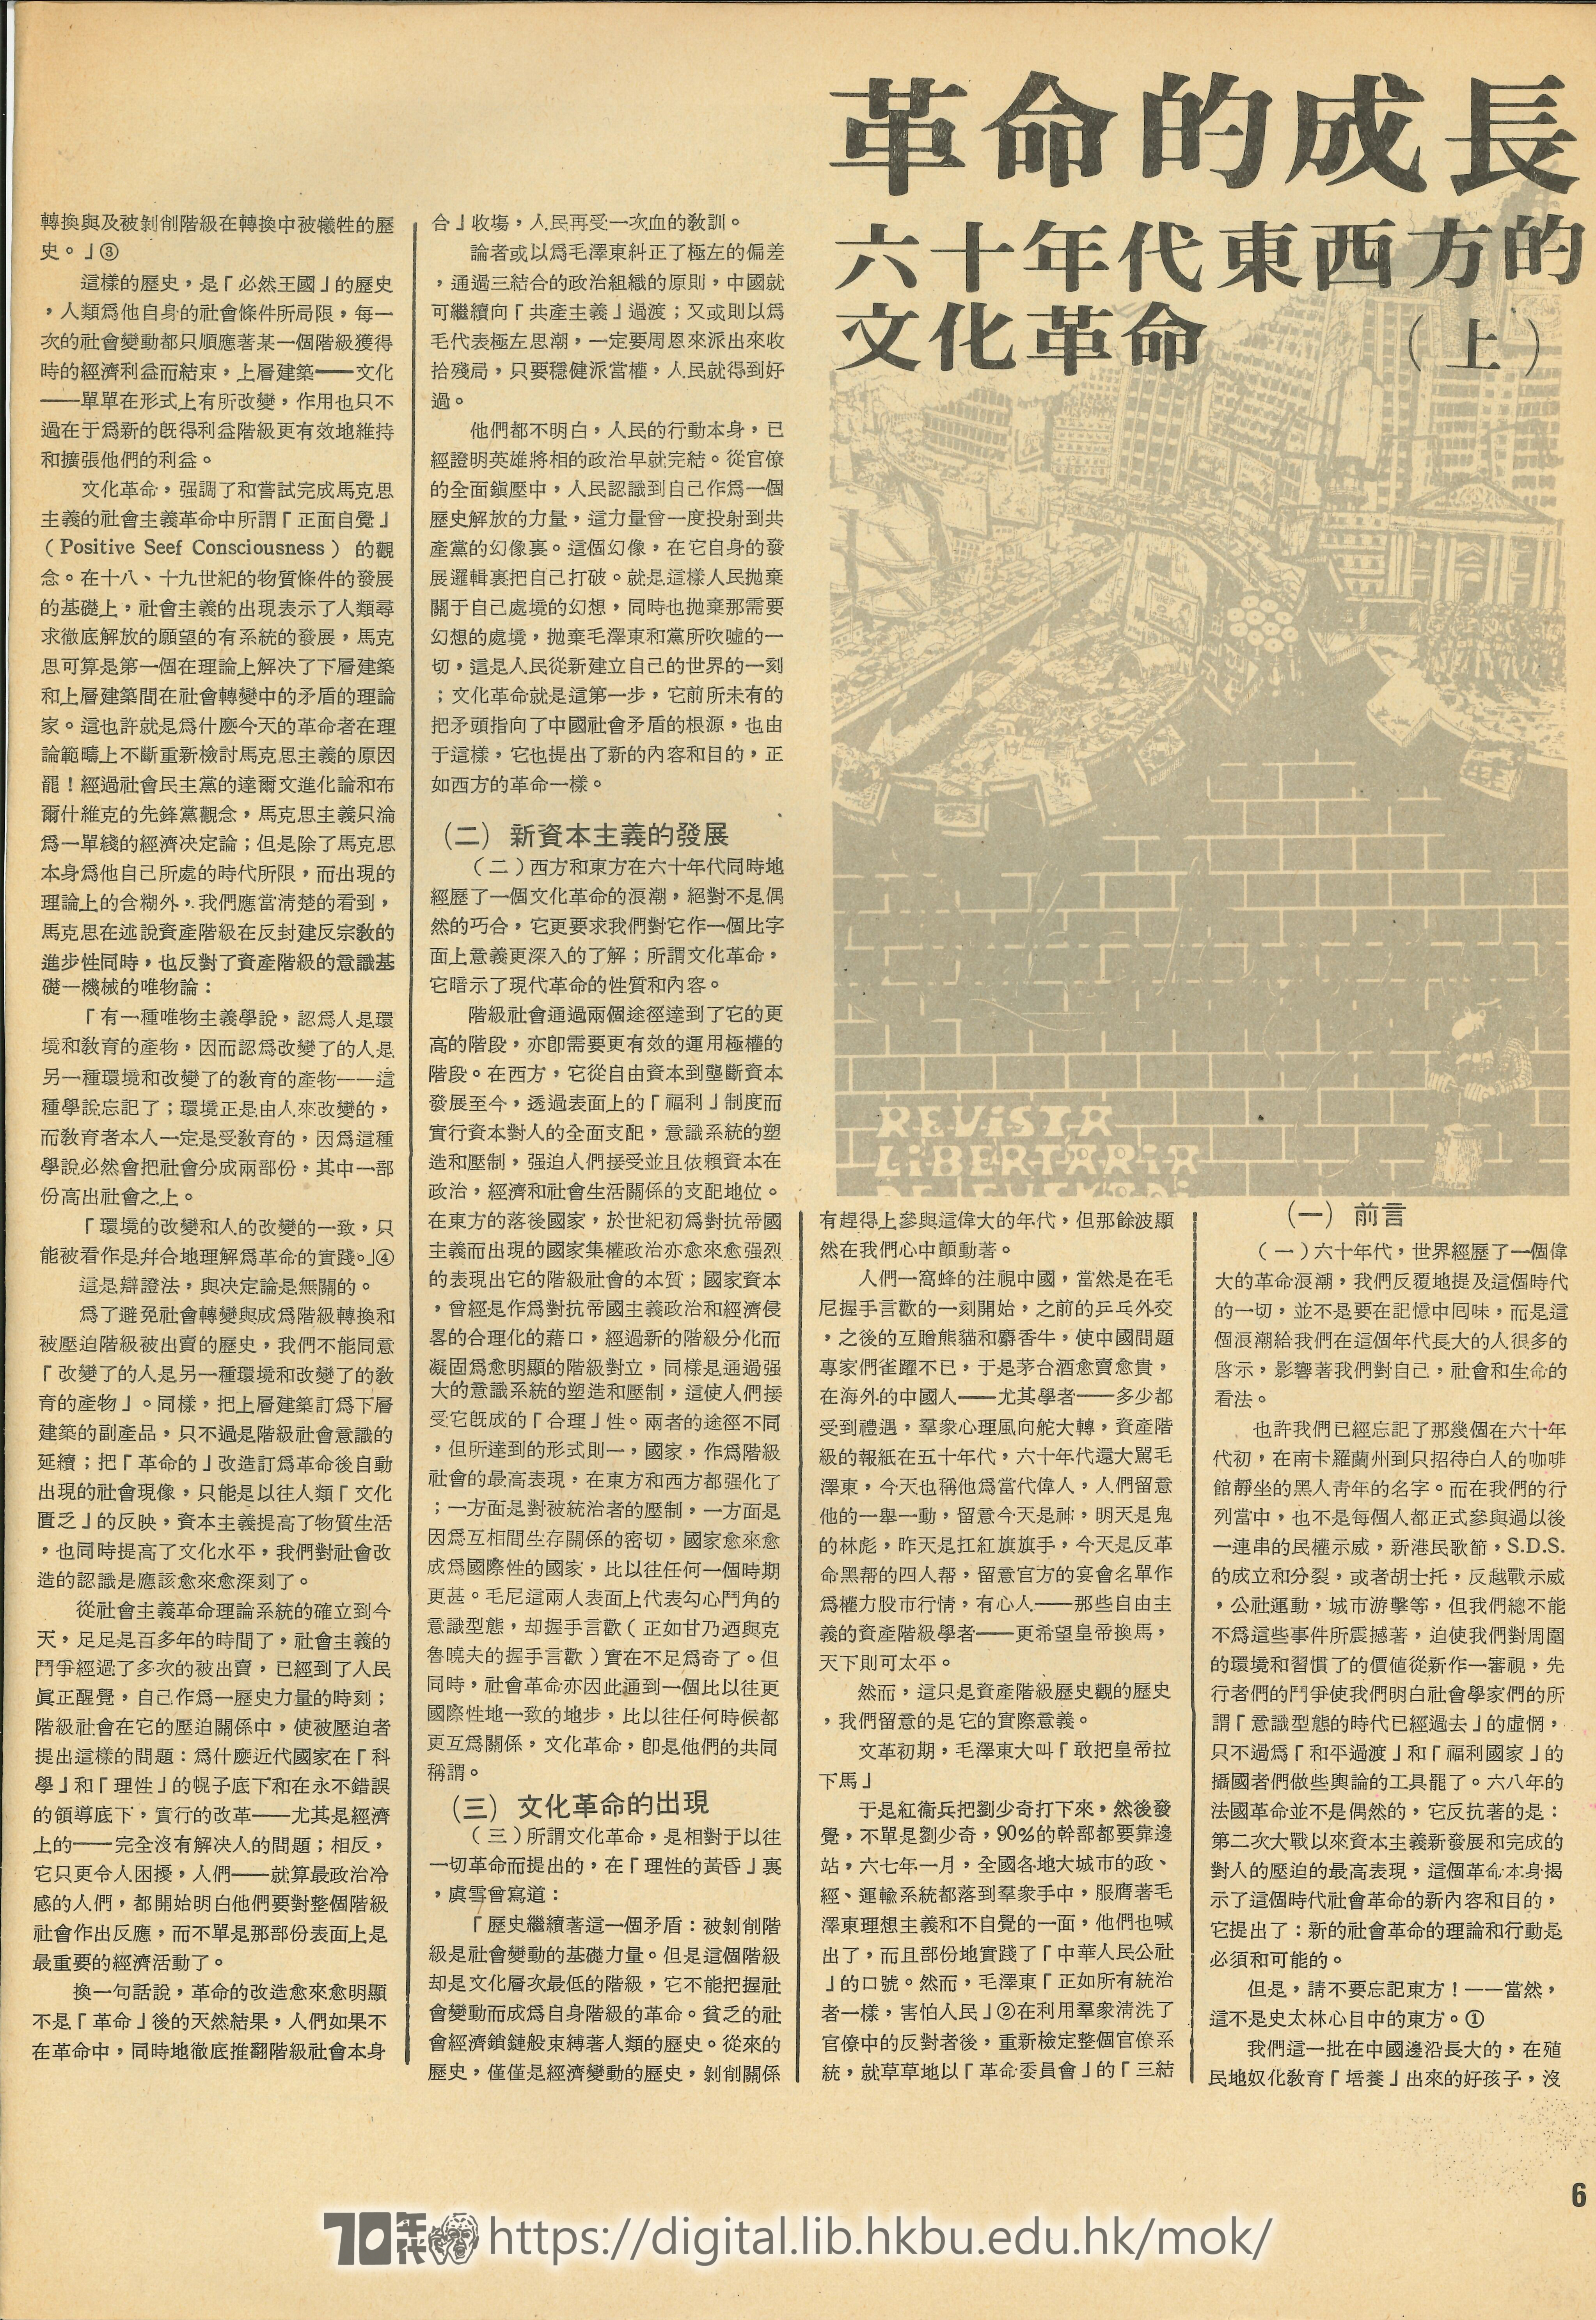  ��������������������� Growth of a revolution - cultural revolution in the east of the 1960s I 沅志雄 